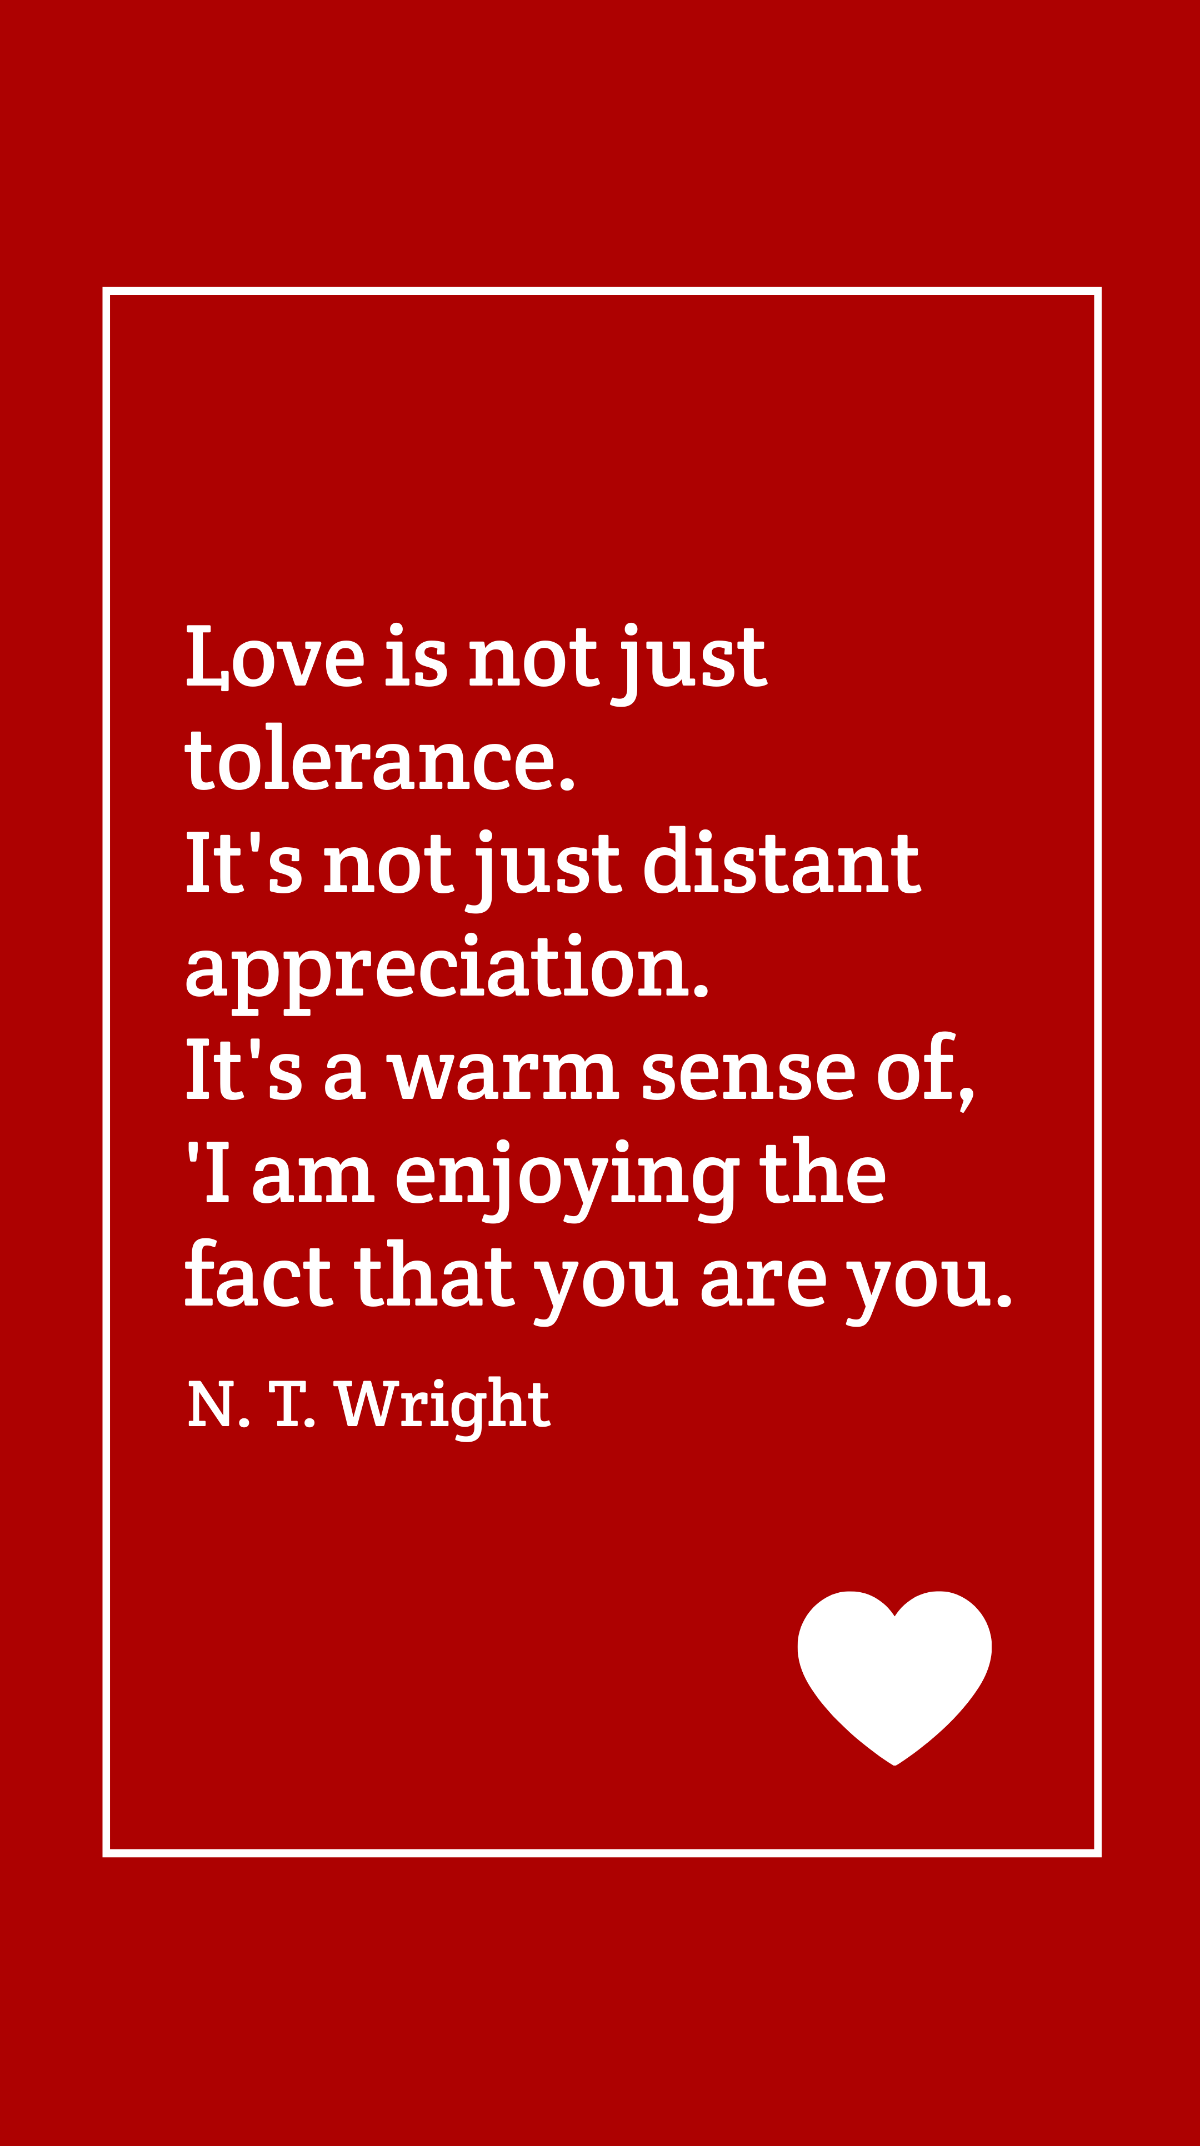 Free N. T. Wright - Love is not just tolerance. It's not just distant appreciation. It's a warm sense of, 'I am enjoying the fact that you are you. Template